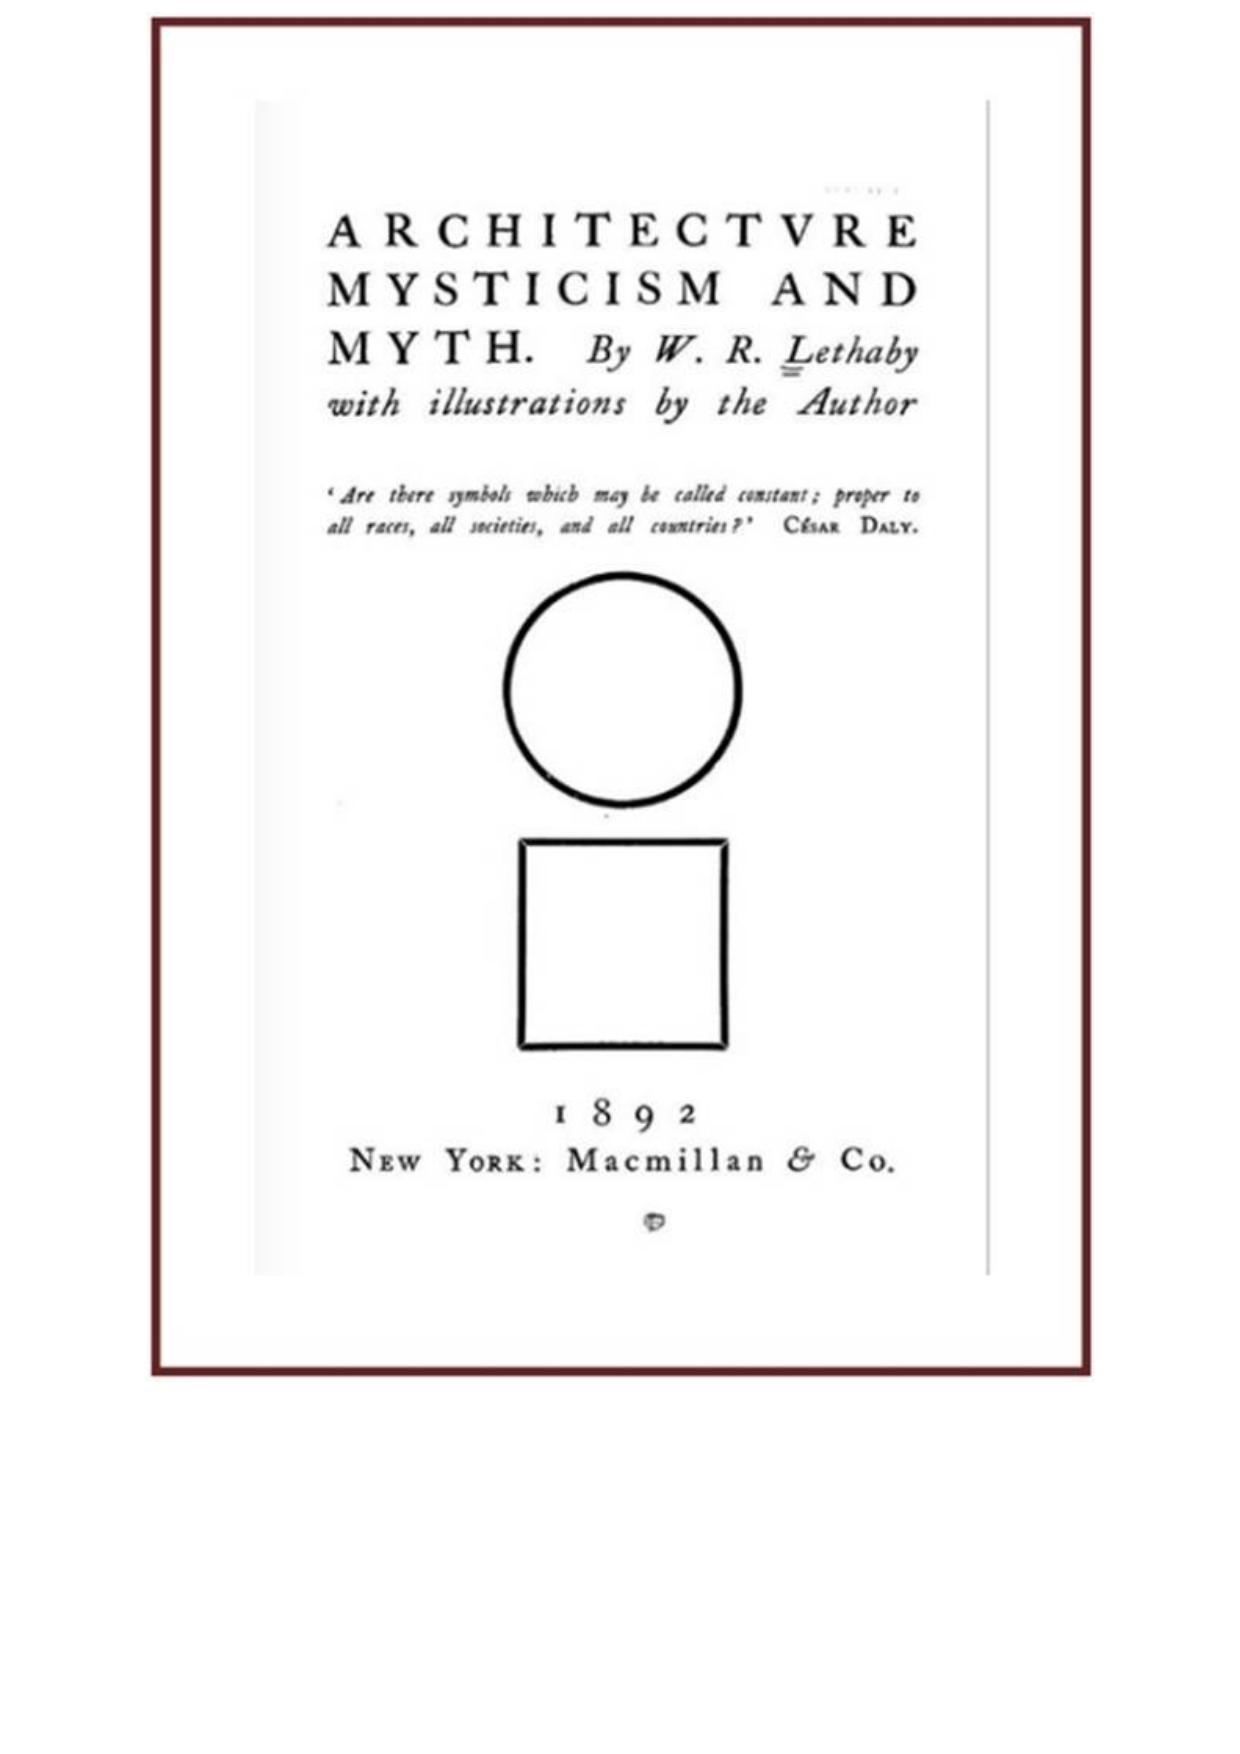 Architecture Mysticism and Myth